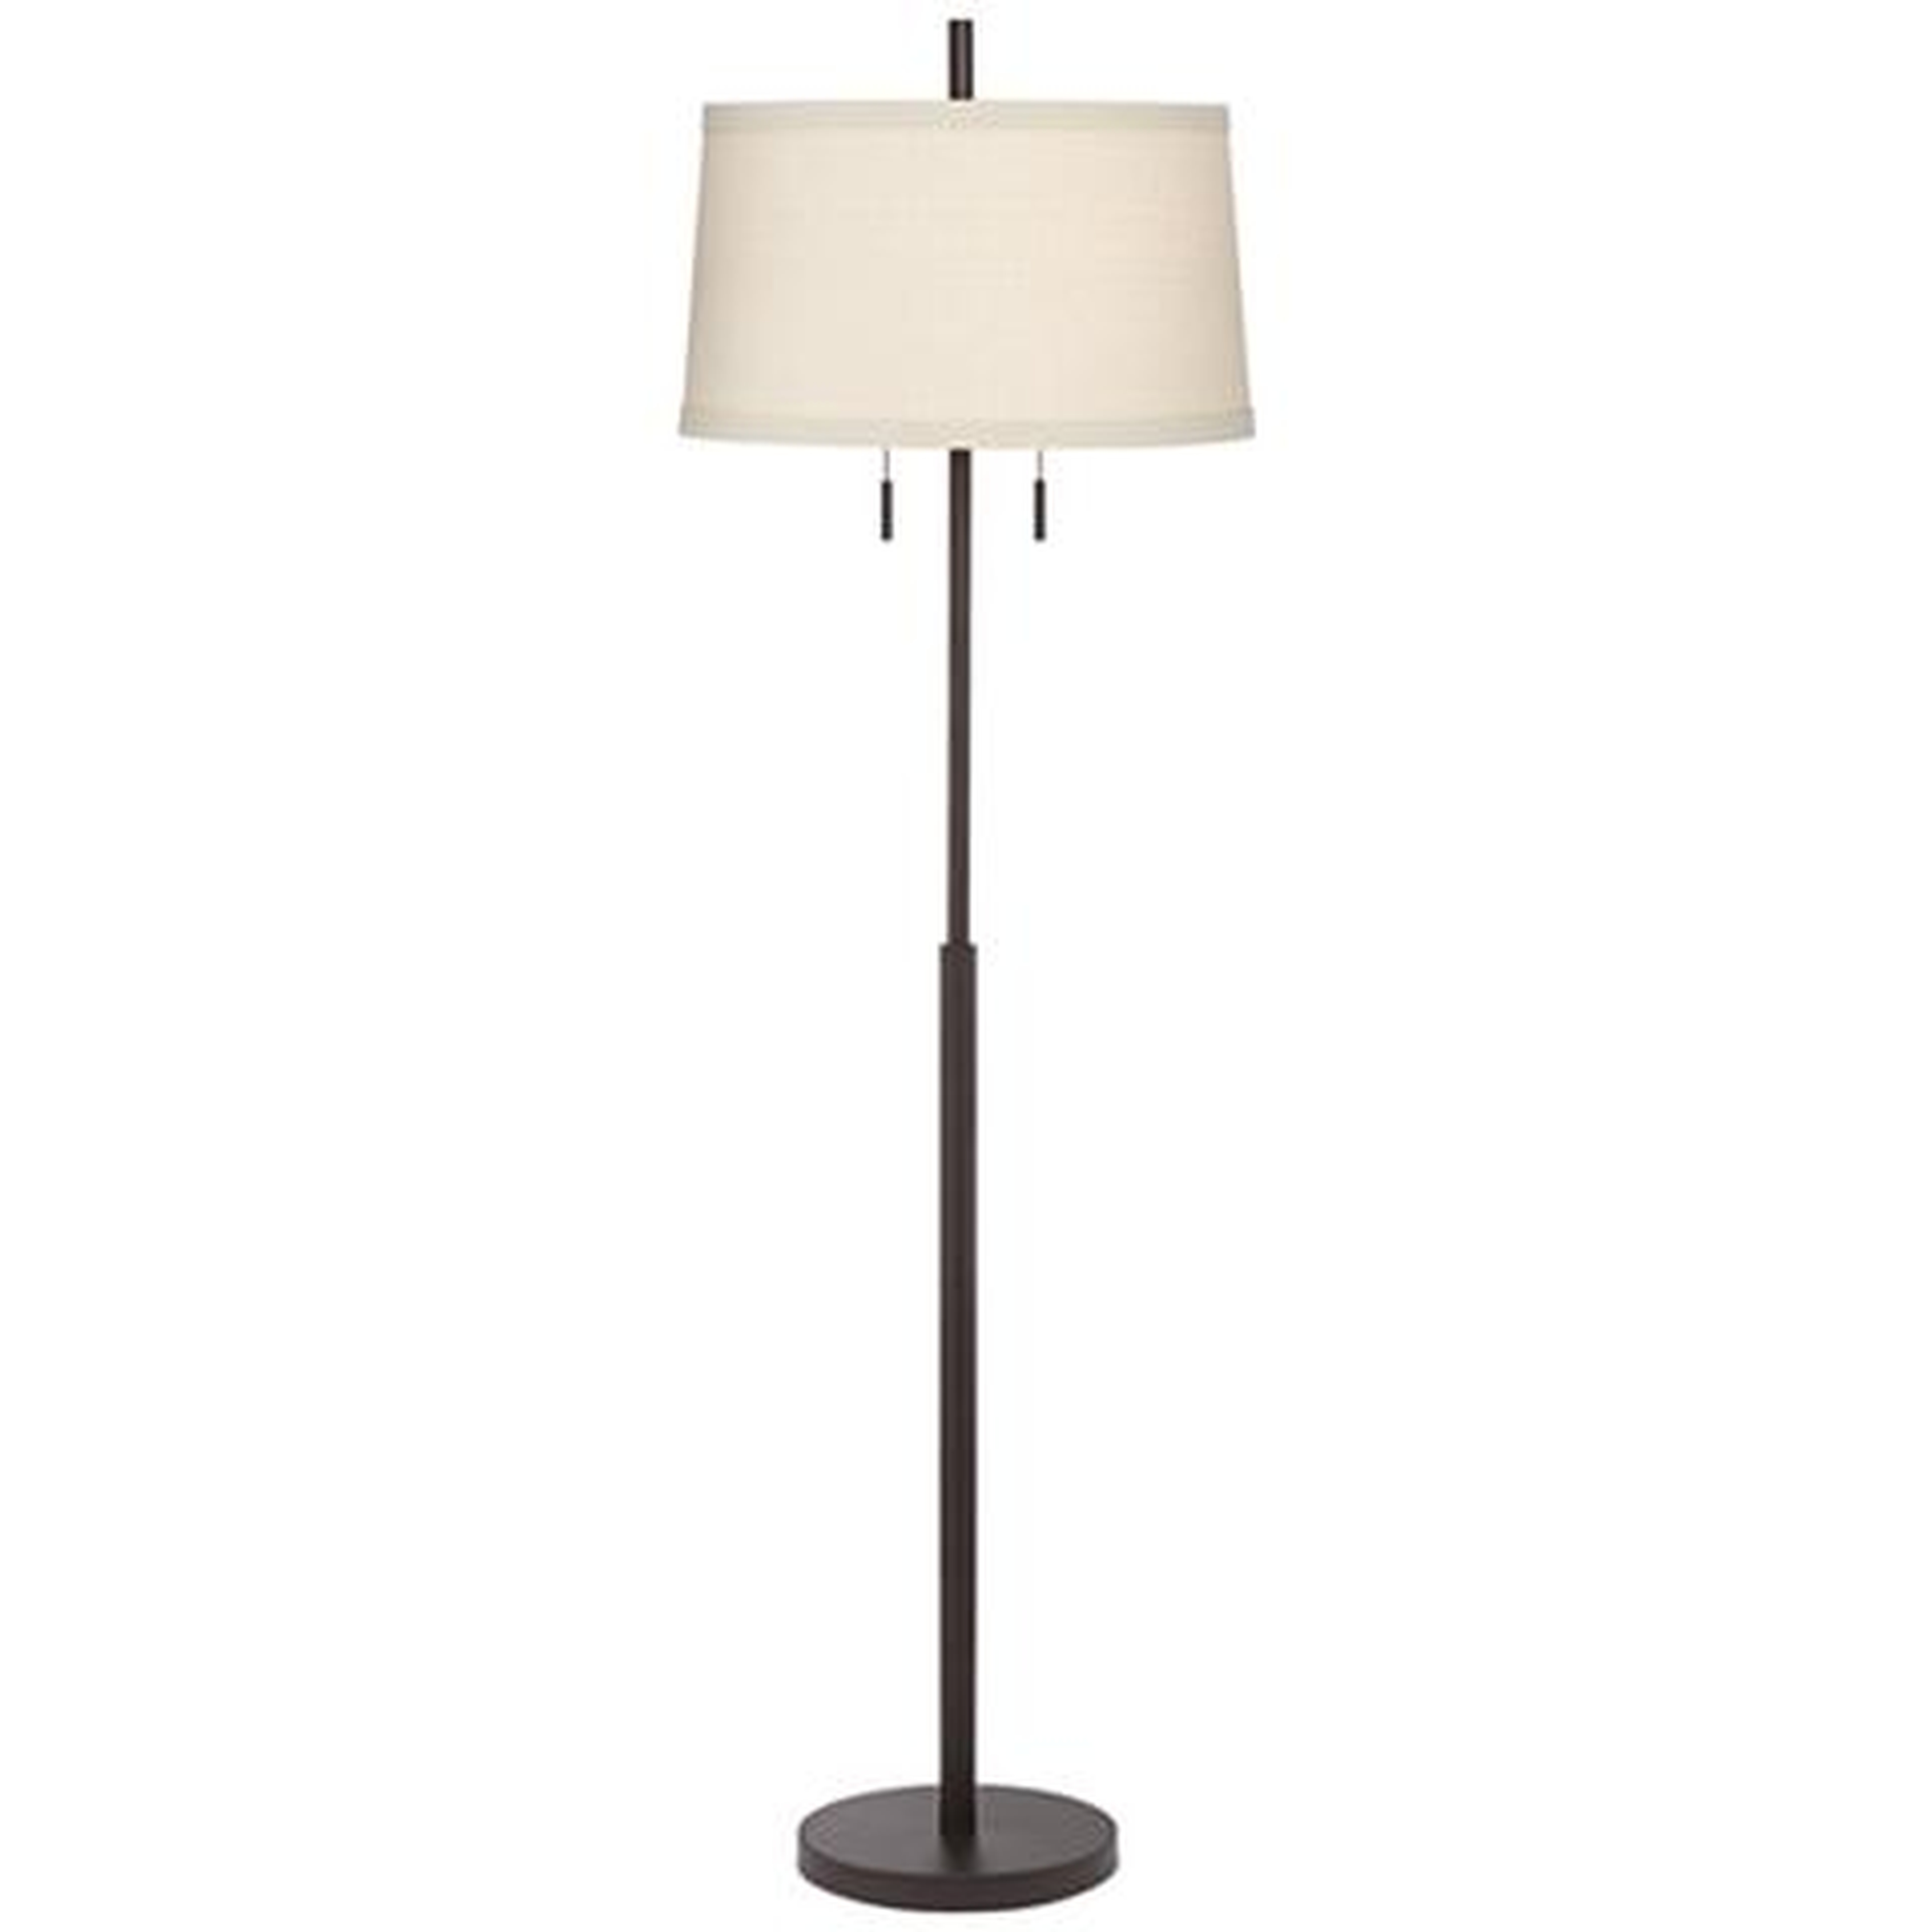 Nayla Bronze Double Pull Chain Floor Lamp Off-White Shade - Lamps Plus